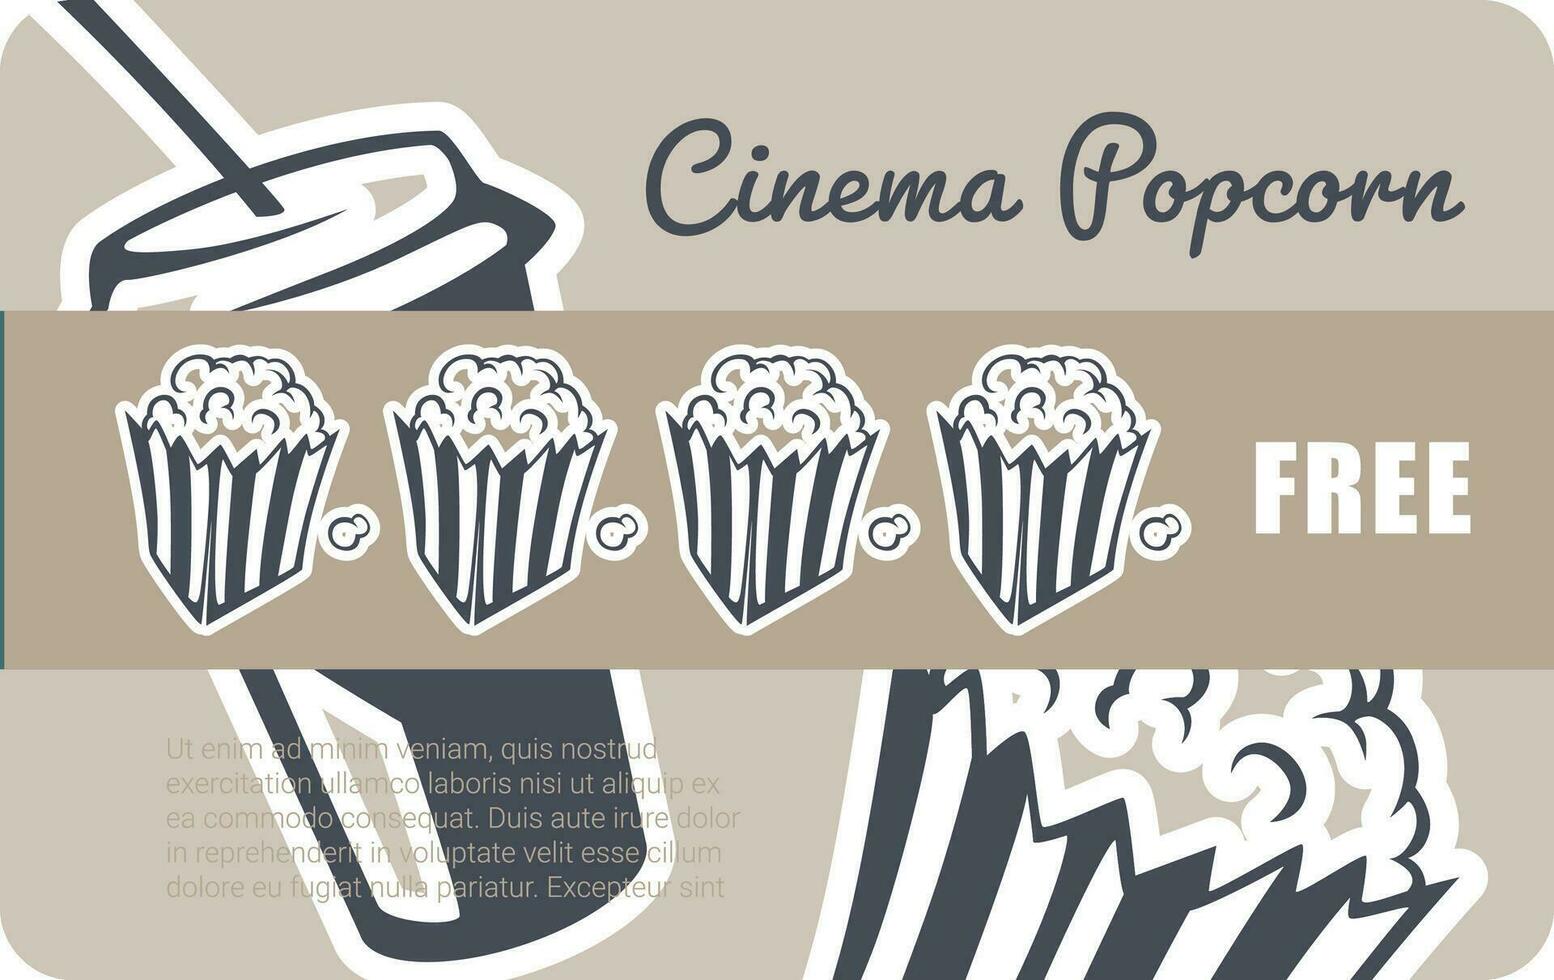 Cinema popcorn free, loyalty card for clients vector